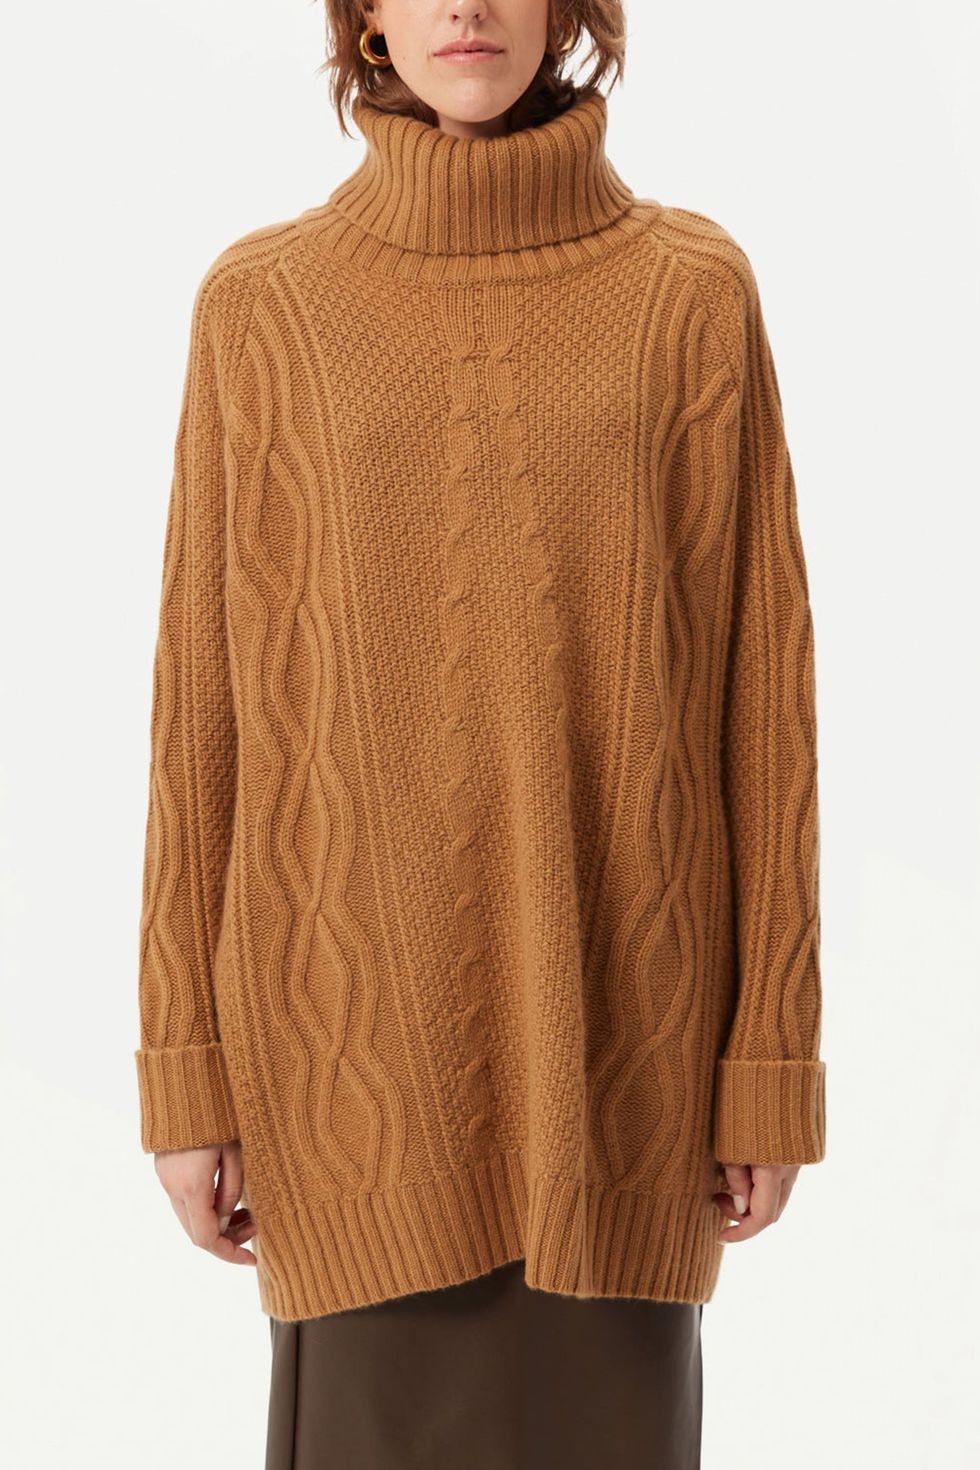 10 Comfy and Wardrobe in your Cozy need you Sweaters